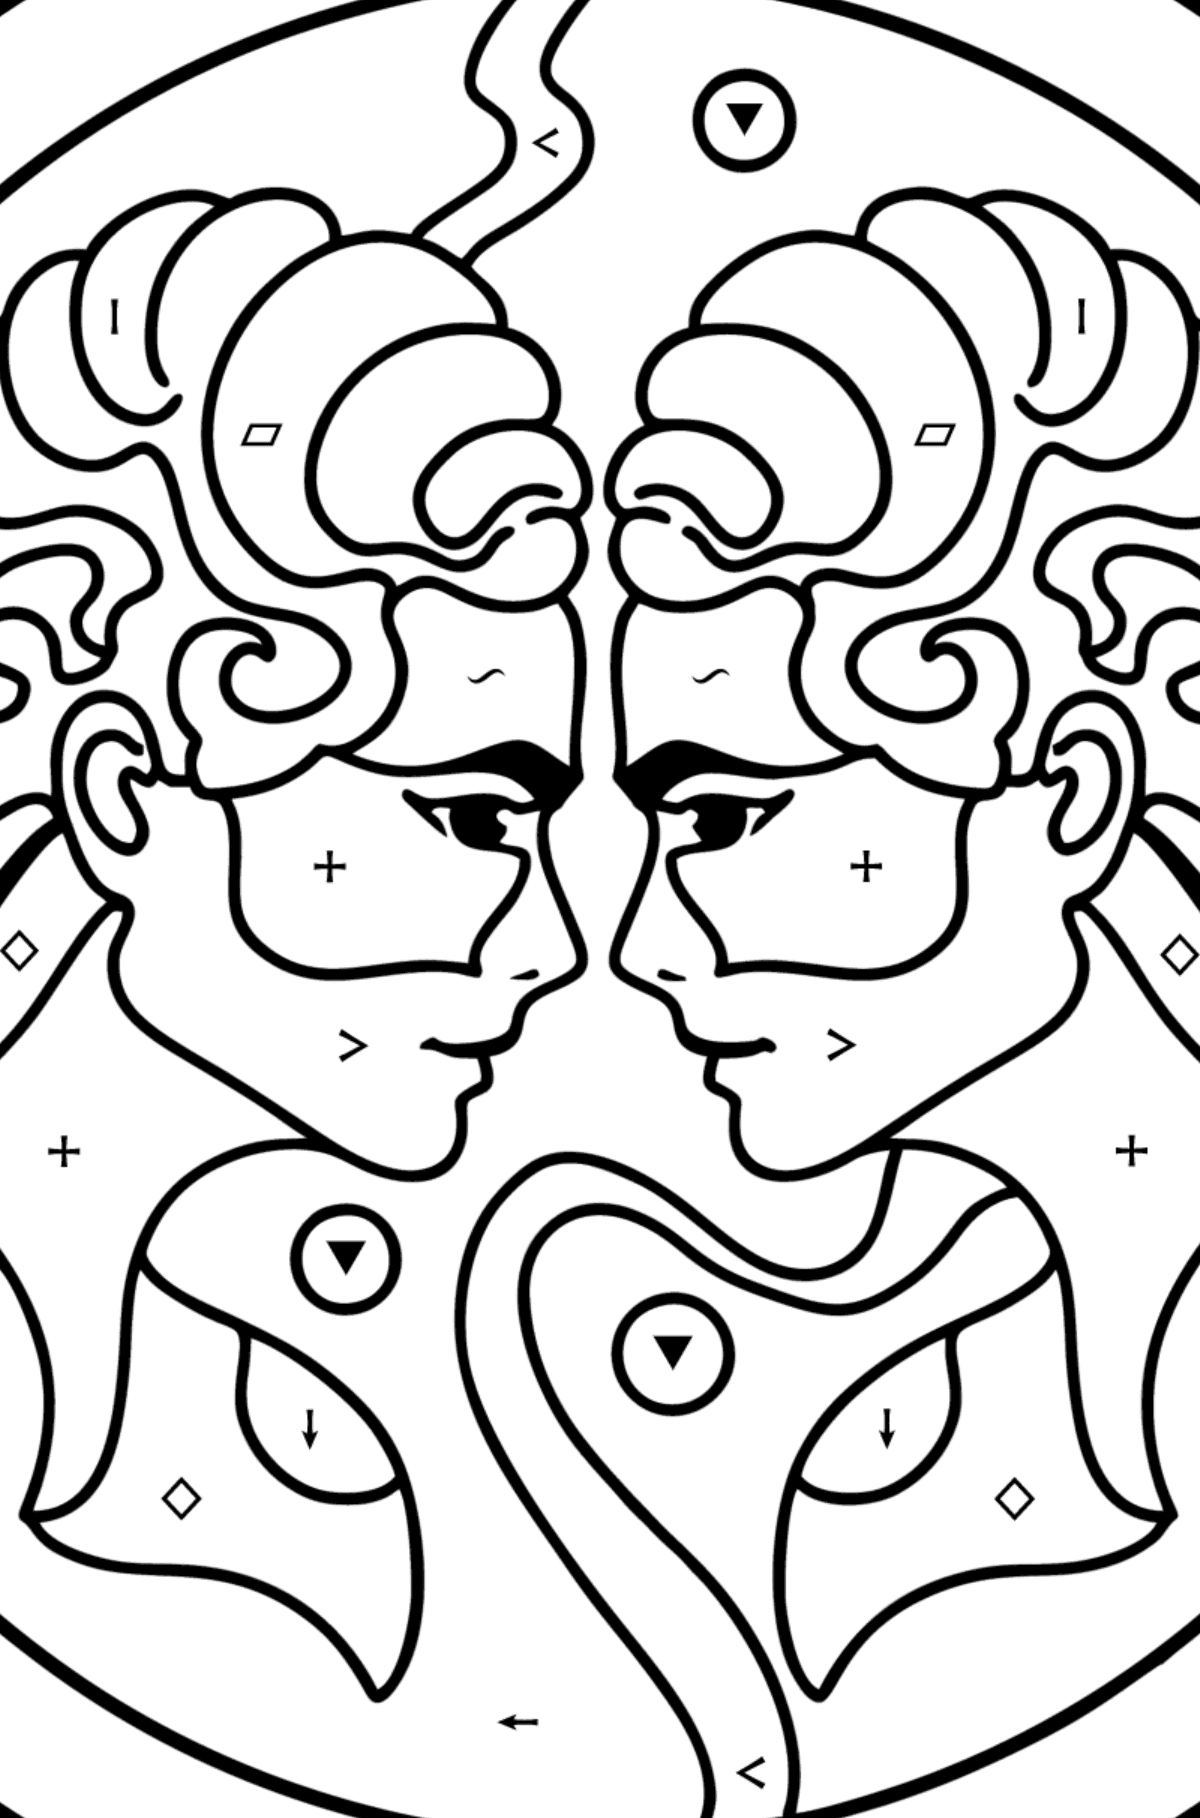 Coloring page for kids - Gemini zodiac sign - Coloring by Symbols and Geometric Shapes for Kids